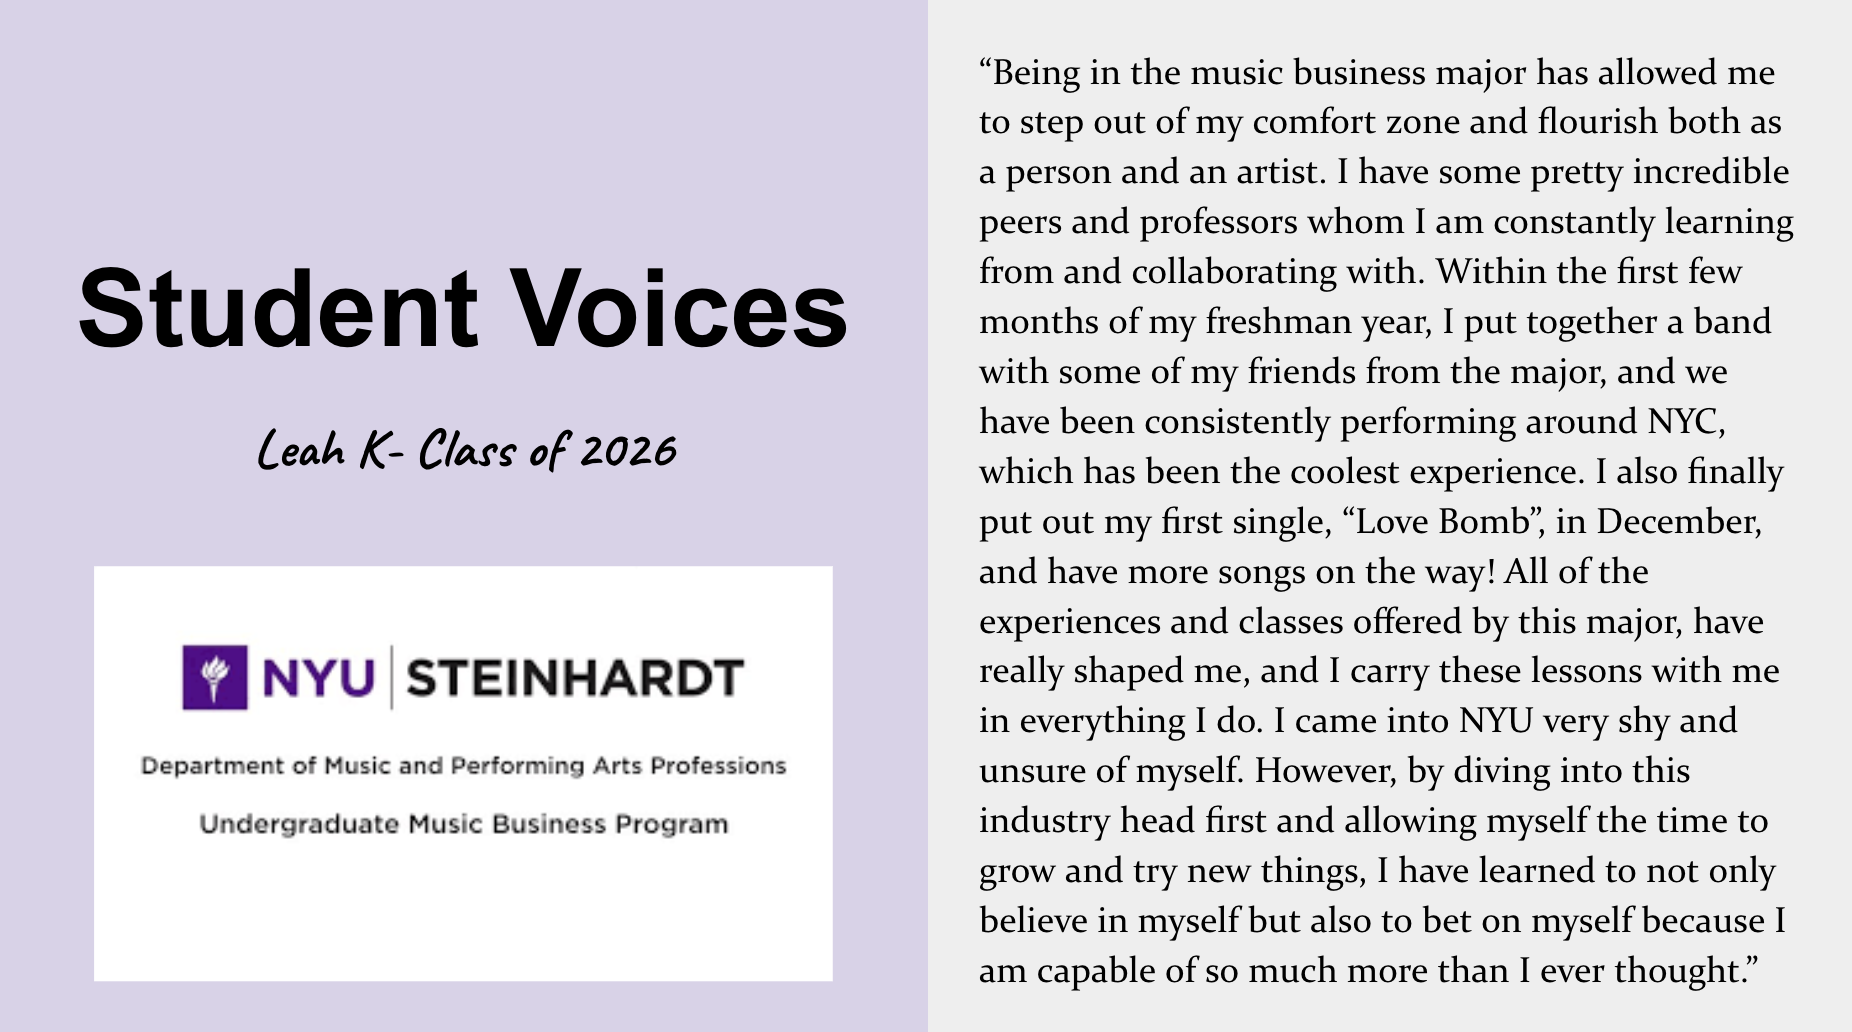 Student voice about the Steinhardt Music Business major. Leah K., Class of 2026, says “Being in the music business major has allowed me to step out of my comfort zone and flourish both as a person and an artist. I have some pretty incredible peers and professors whom I am constantly learning from and collaborating with. Within the first few months of my freshman year, I put together a band with some of my friends from the major, and we have been consistently performing around NYC, which has been the coolest experience. I also finally put out my first single, ‘Love Bomb,’ in December, and have more songs on the way! All of the experiences and classes offered by this major, have really shaped me, and I carry these lessons with me in everything I do. I came into NYU very shy and unsure of myself. However, by diving into this industry head first and allowing myself the time to grow and try new things, I have learned to not only believe in myself but also to bet on myself because I am capable of so much more than I ever thought.”